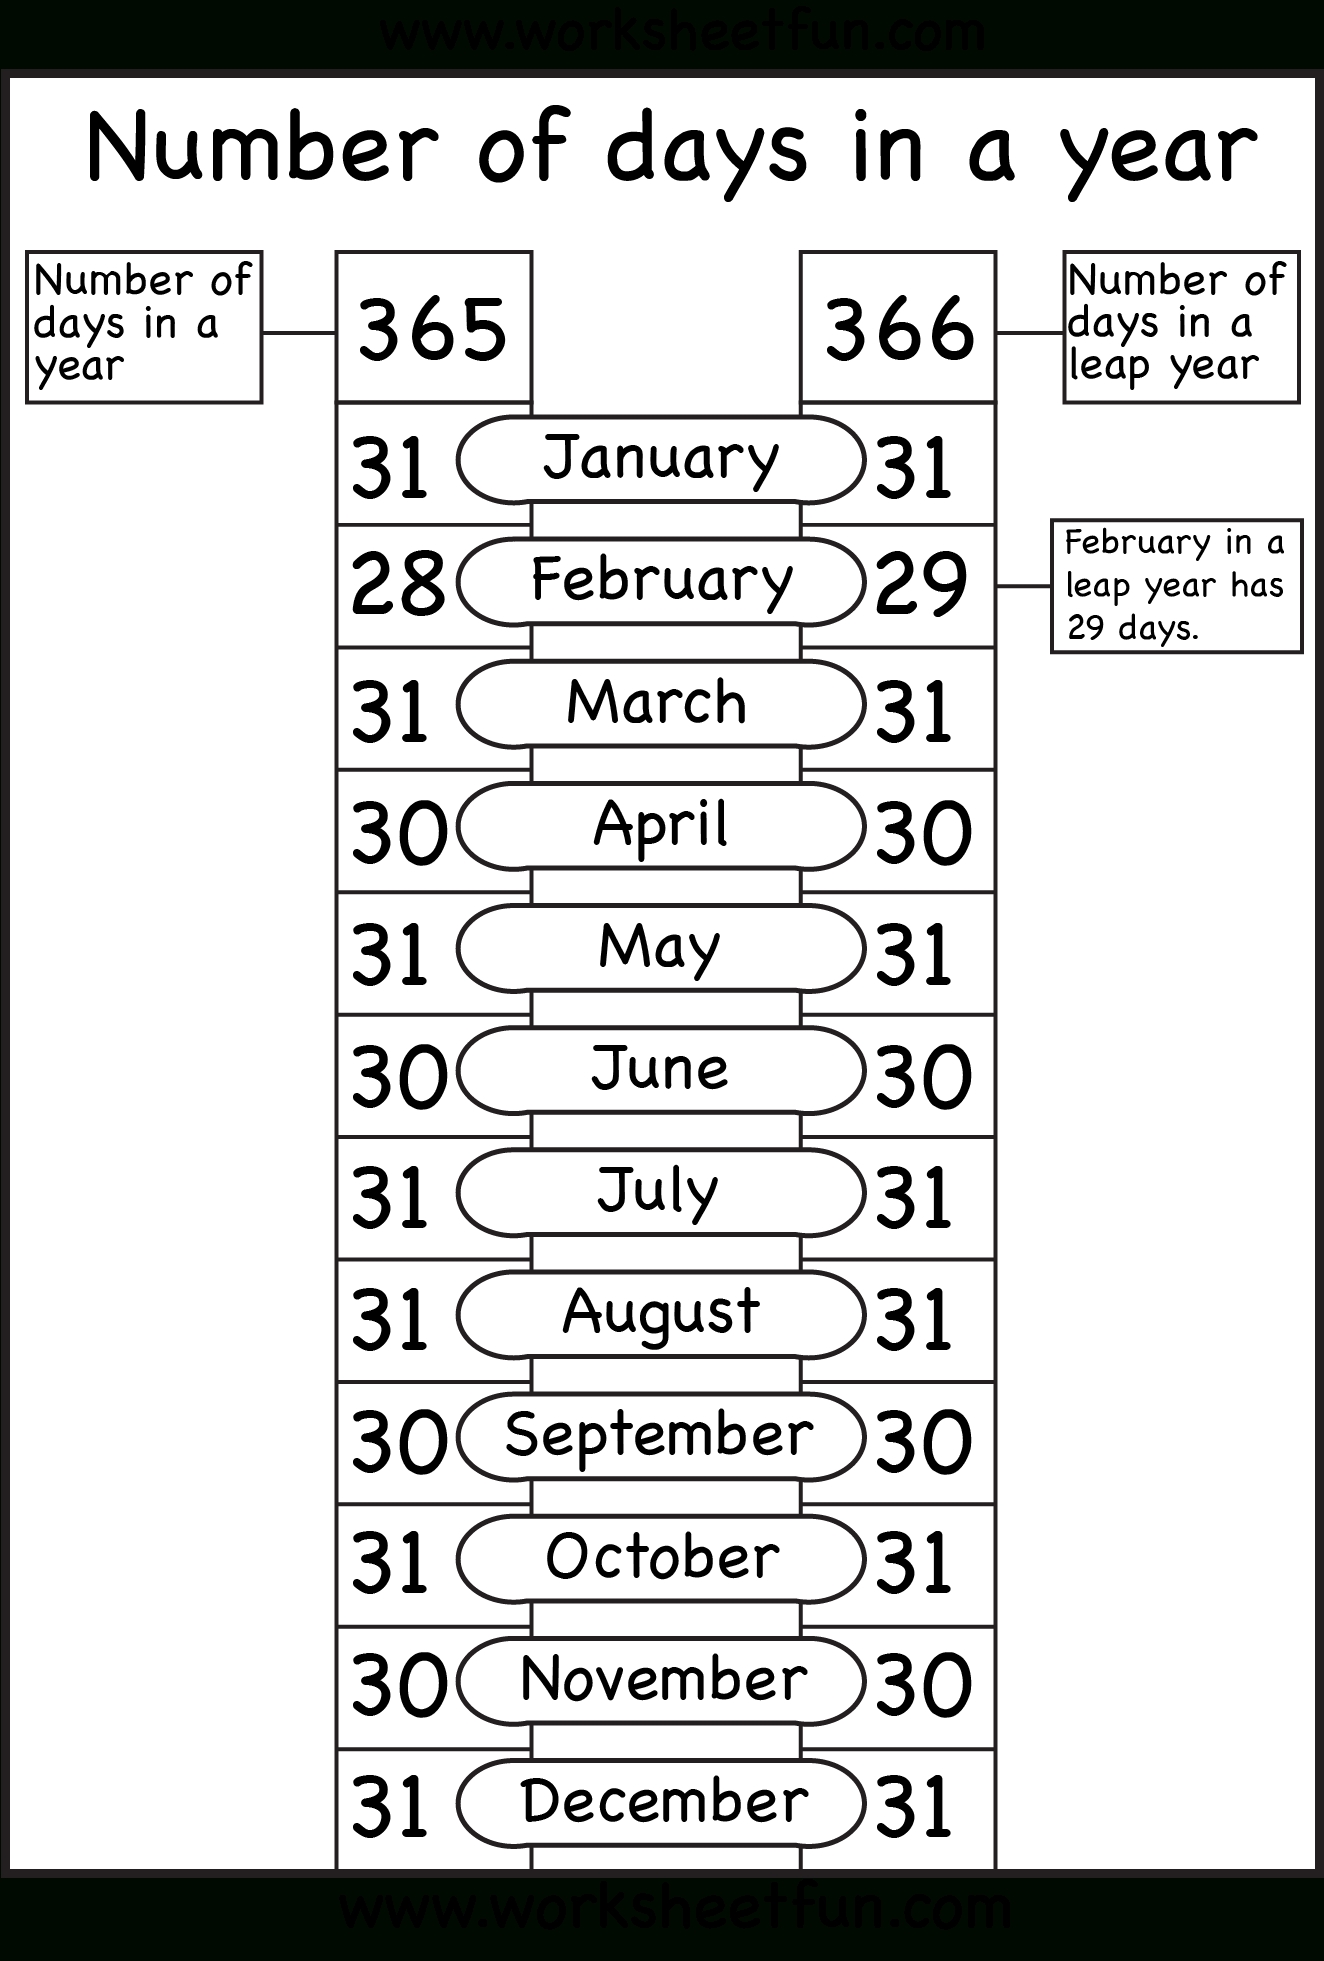 Months Of The Year - Number Of Days In A Year | English